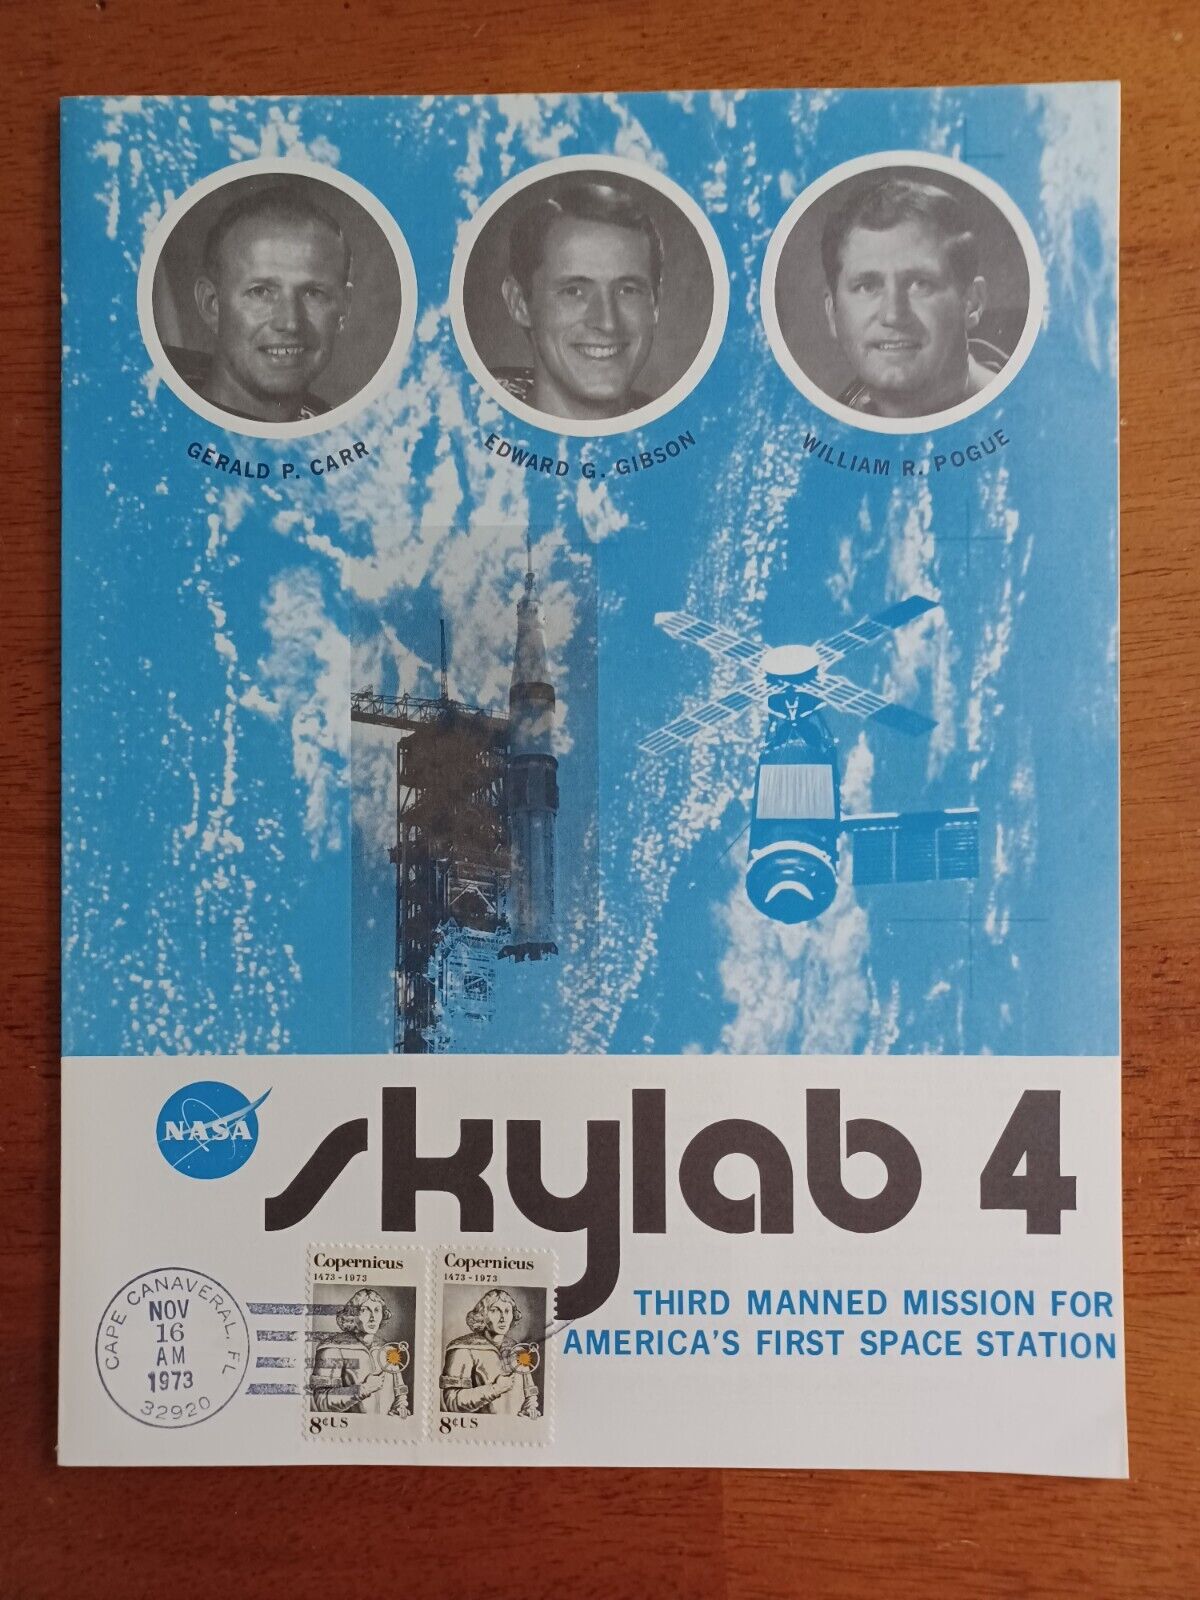 NASA space Skylab 4 Original 11x8.5 Size RARE Booklet With Launch 11/16/73 Cancl